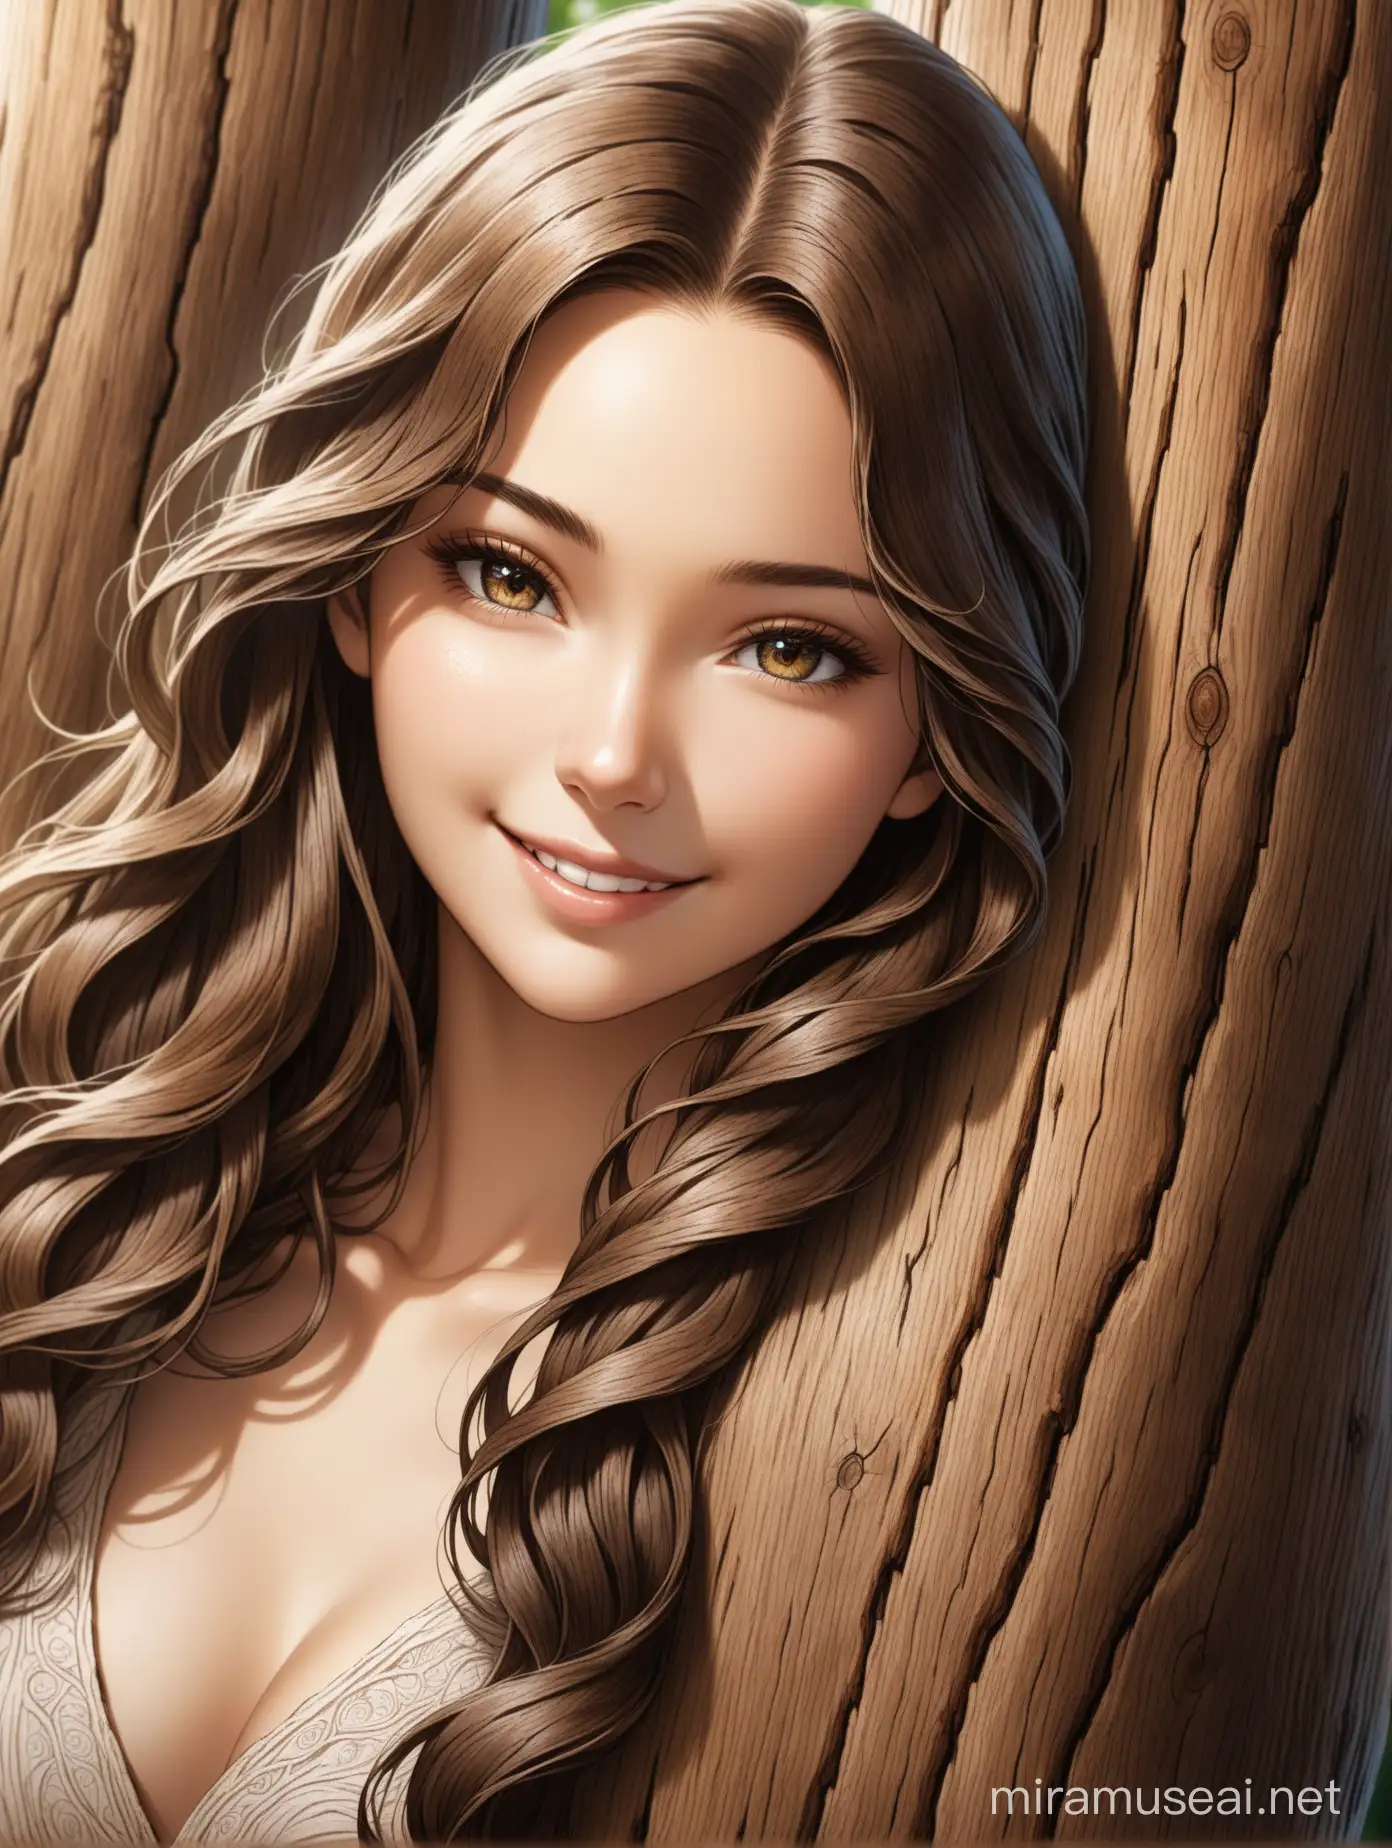 Handcrafted Engraving Portrait of a Serene Young Woman on Weathered Wood